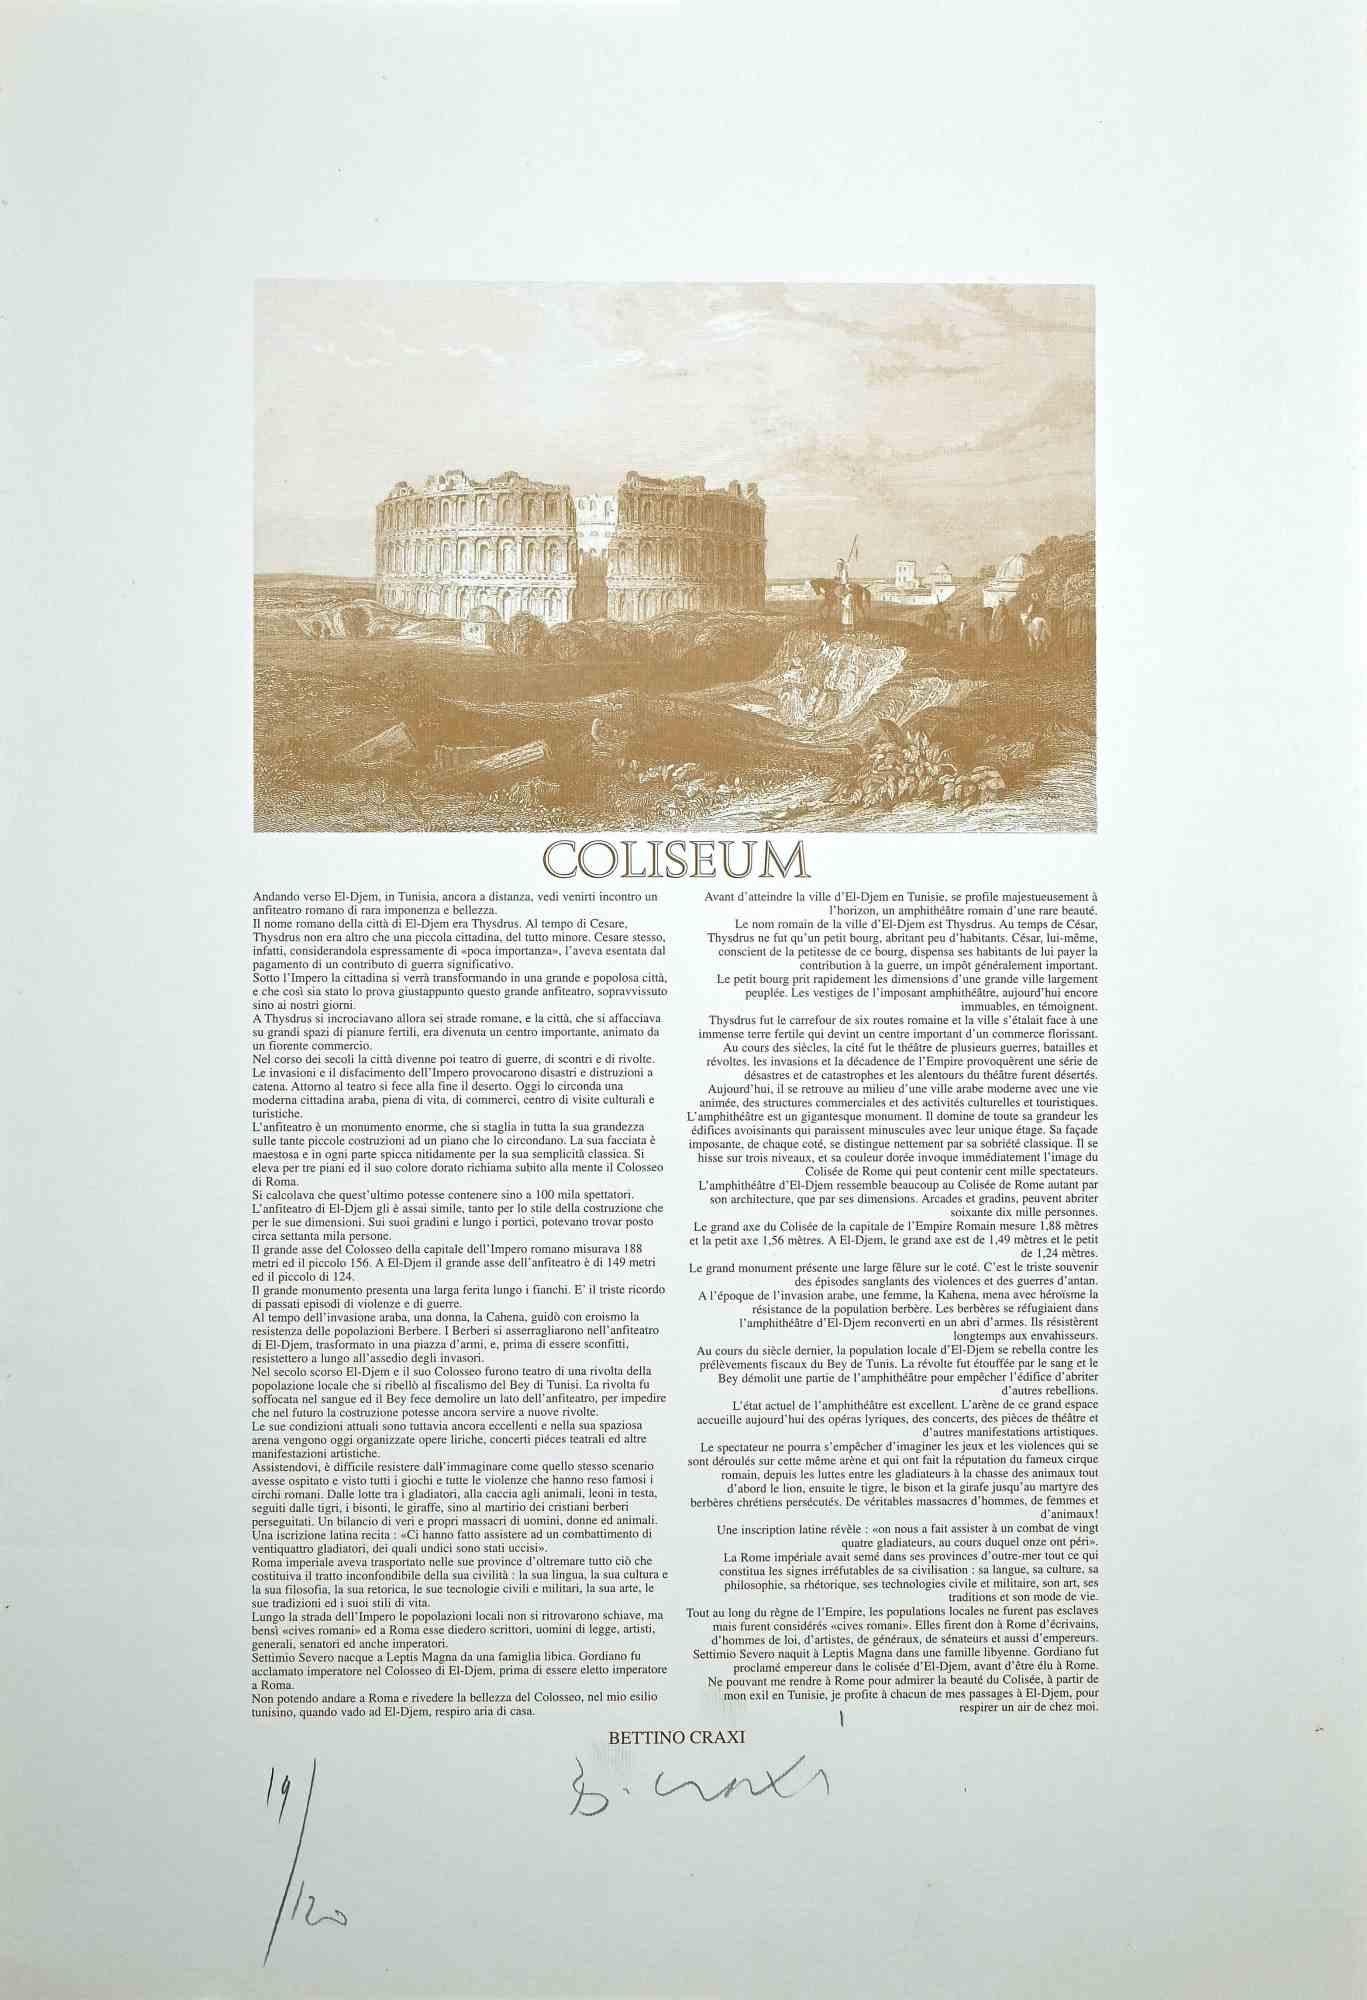 Coliseum - Lithograph and Offset by Bettino Craxi - 1970s